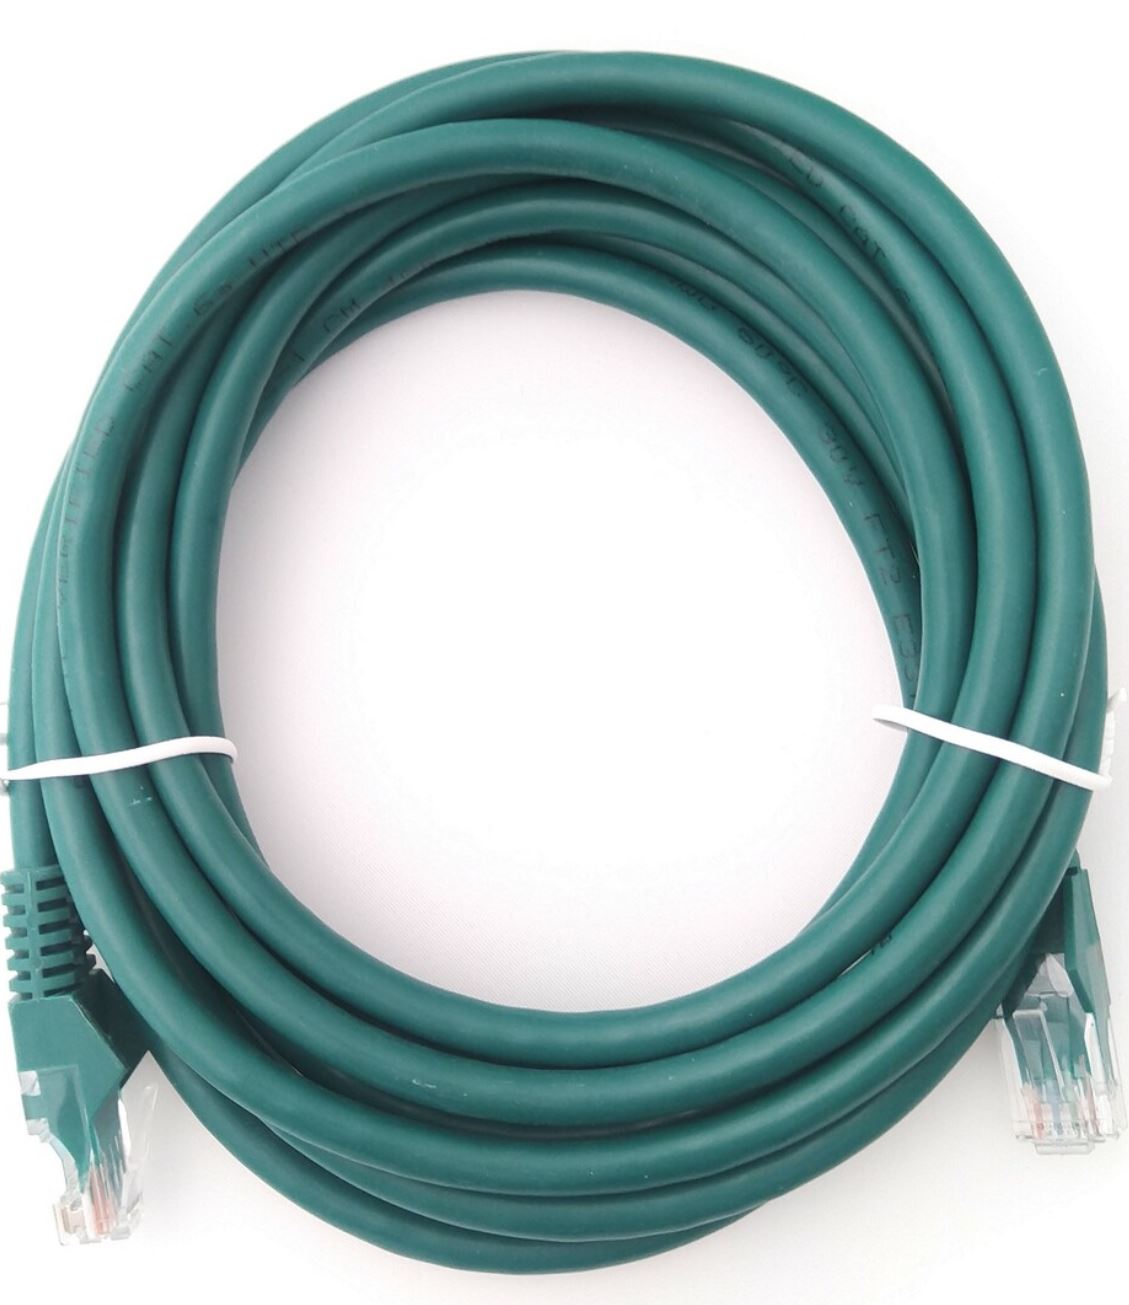 2m UTP Ethernet Cable (Green, Cat 6A)